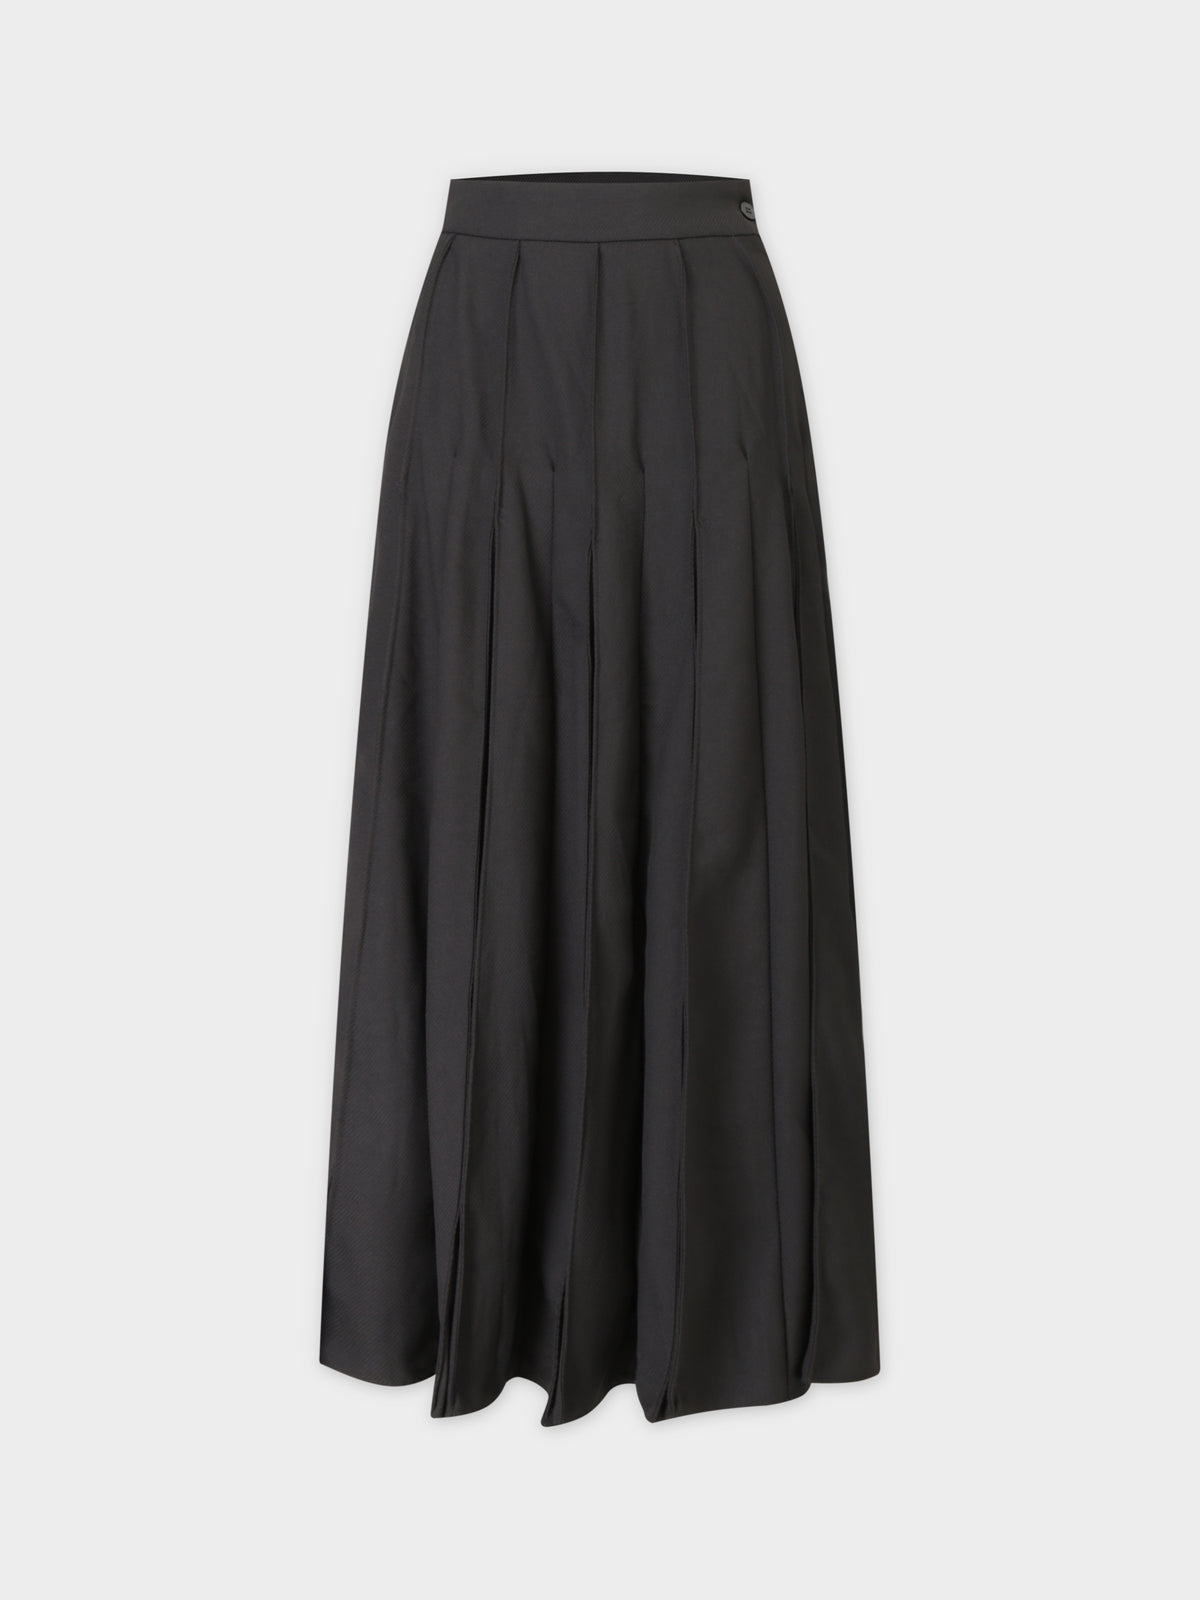 Top Stitched Pleated Skirt-Black